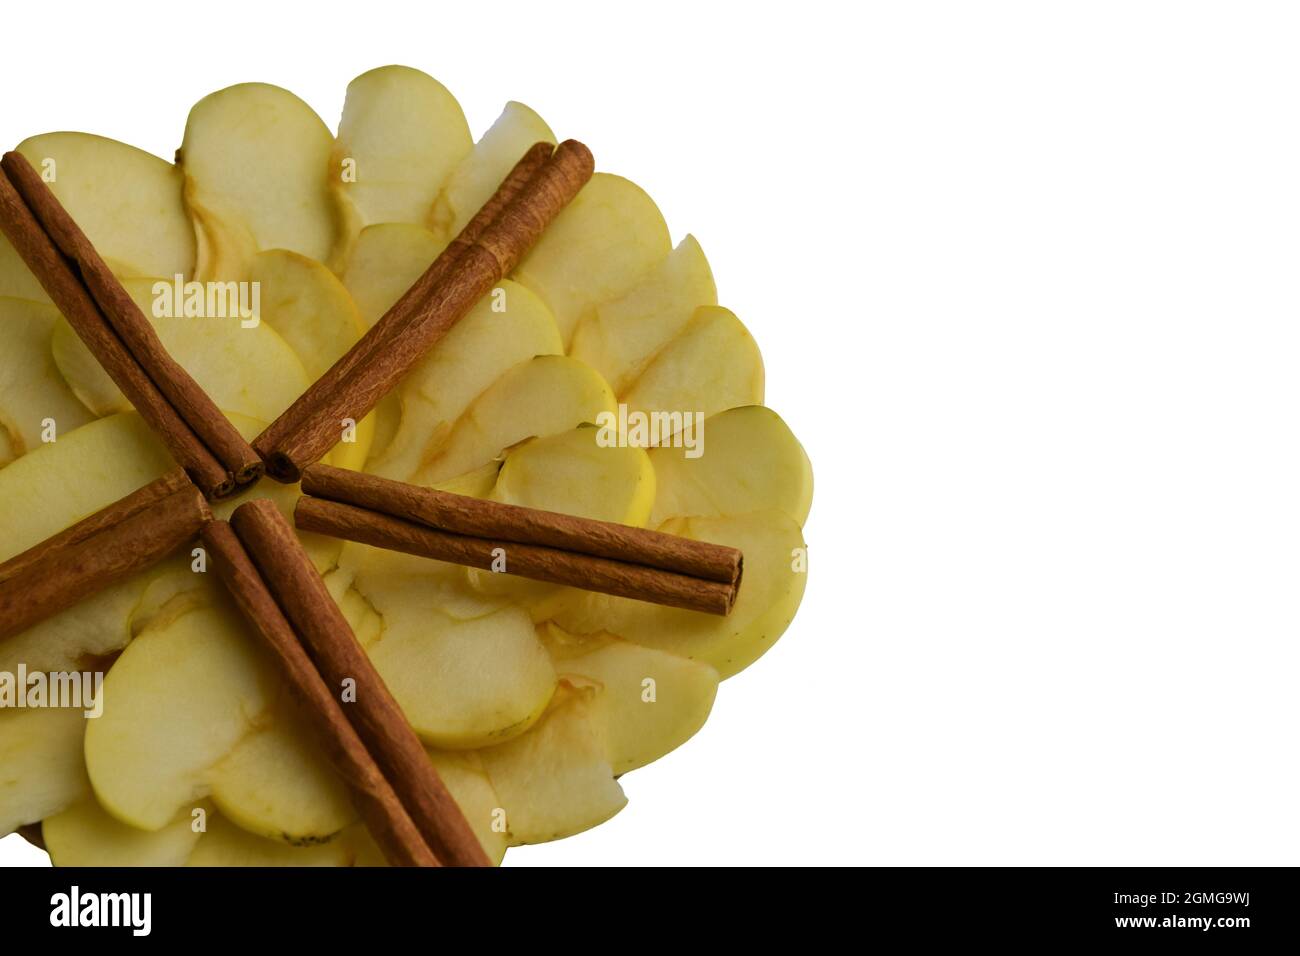 Sliced white apples and cinnamon lined with a circle and a star on a white background Stock Photo